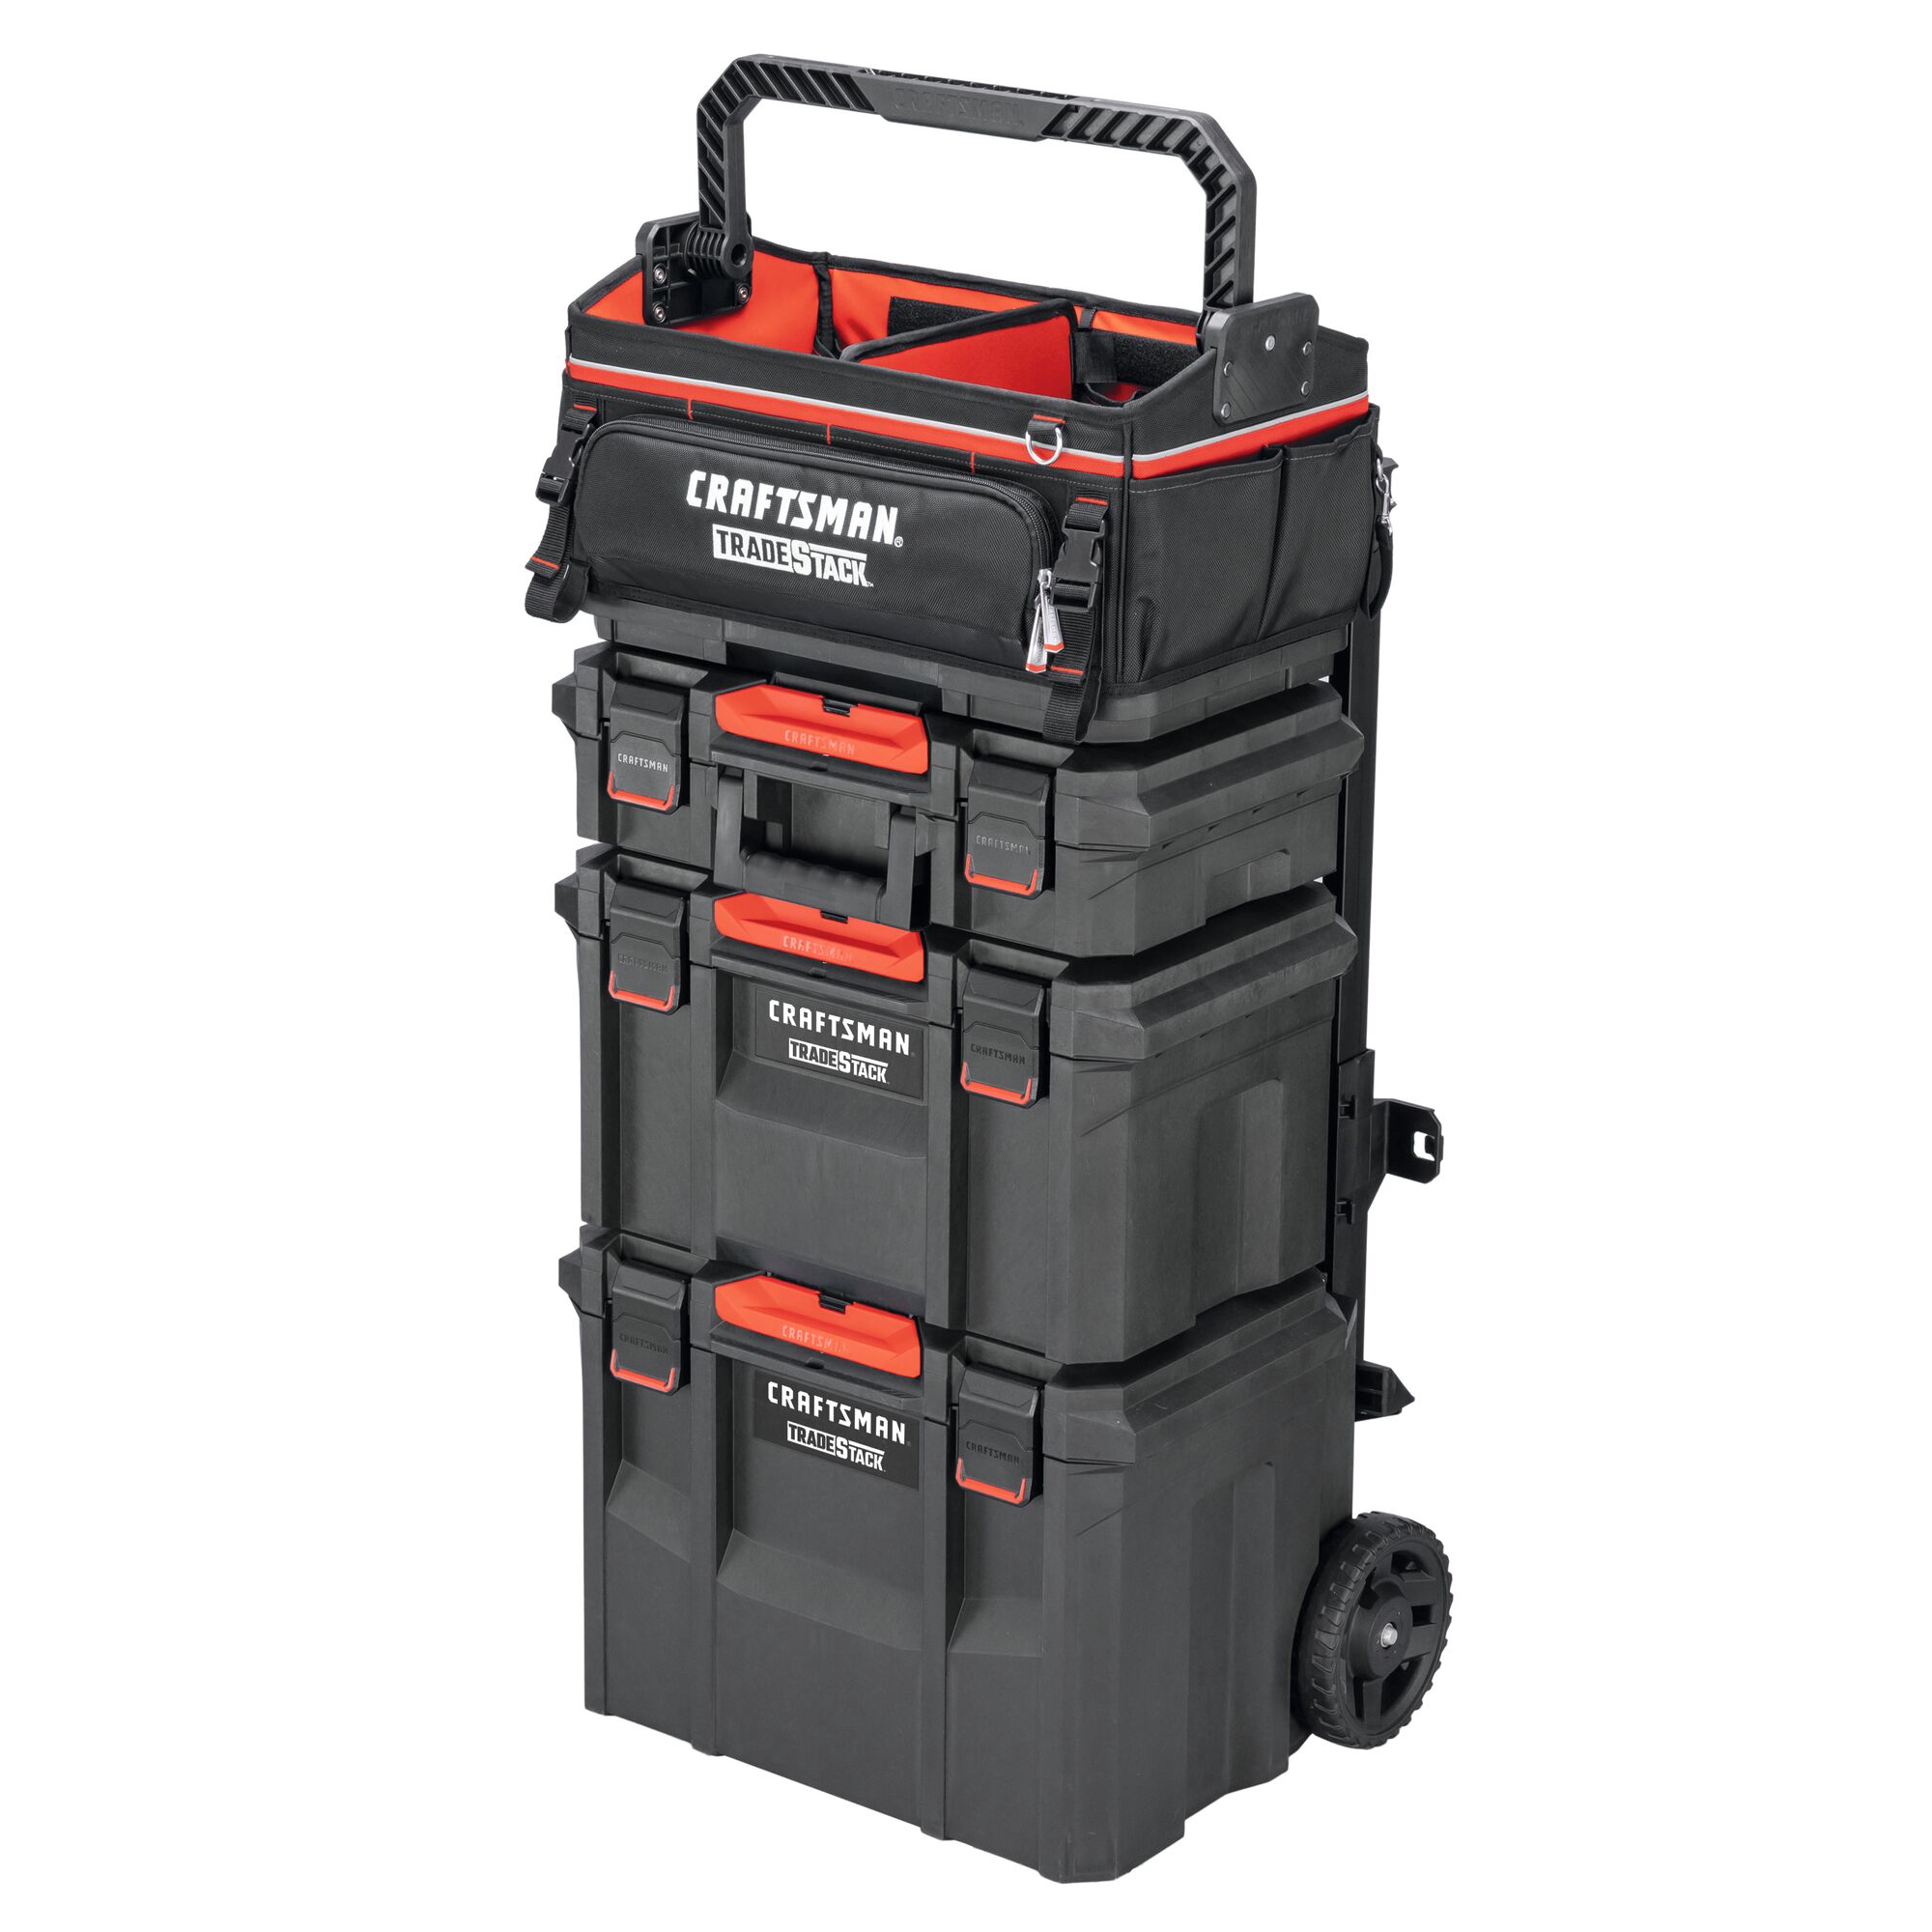 Compatible with all tradestack modules feature of Tradestack 22 inch tool tote.